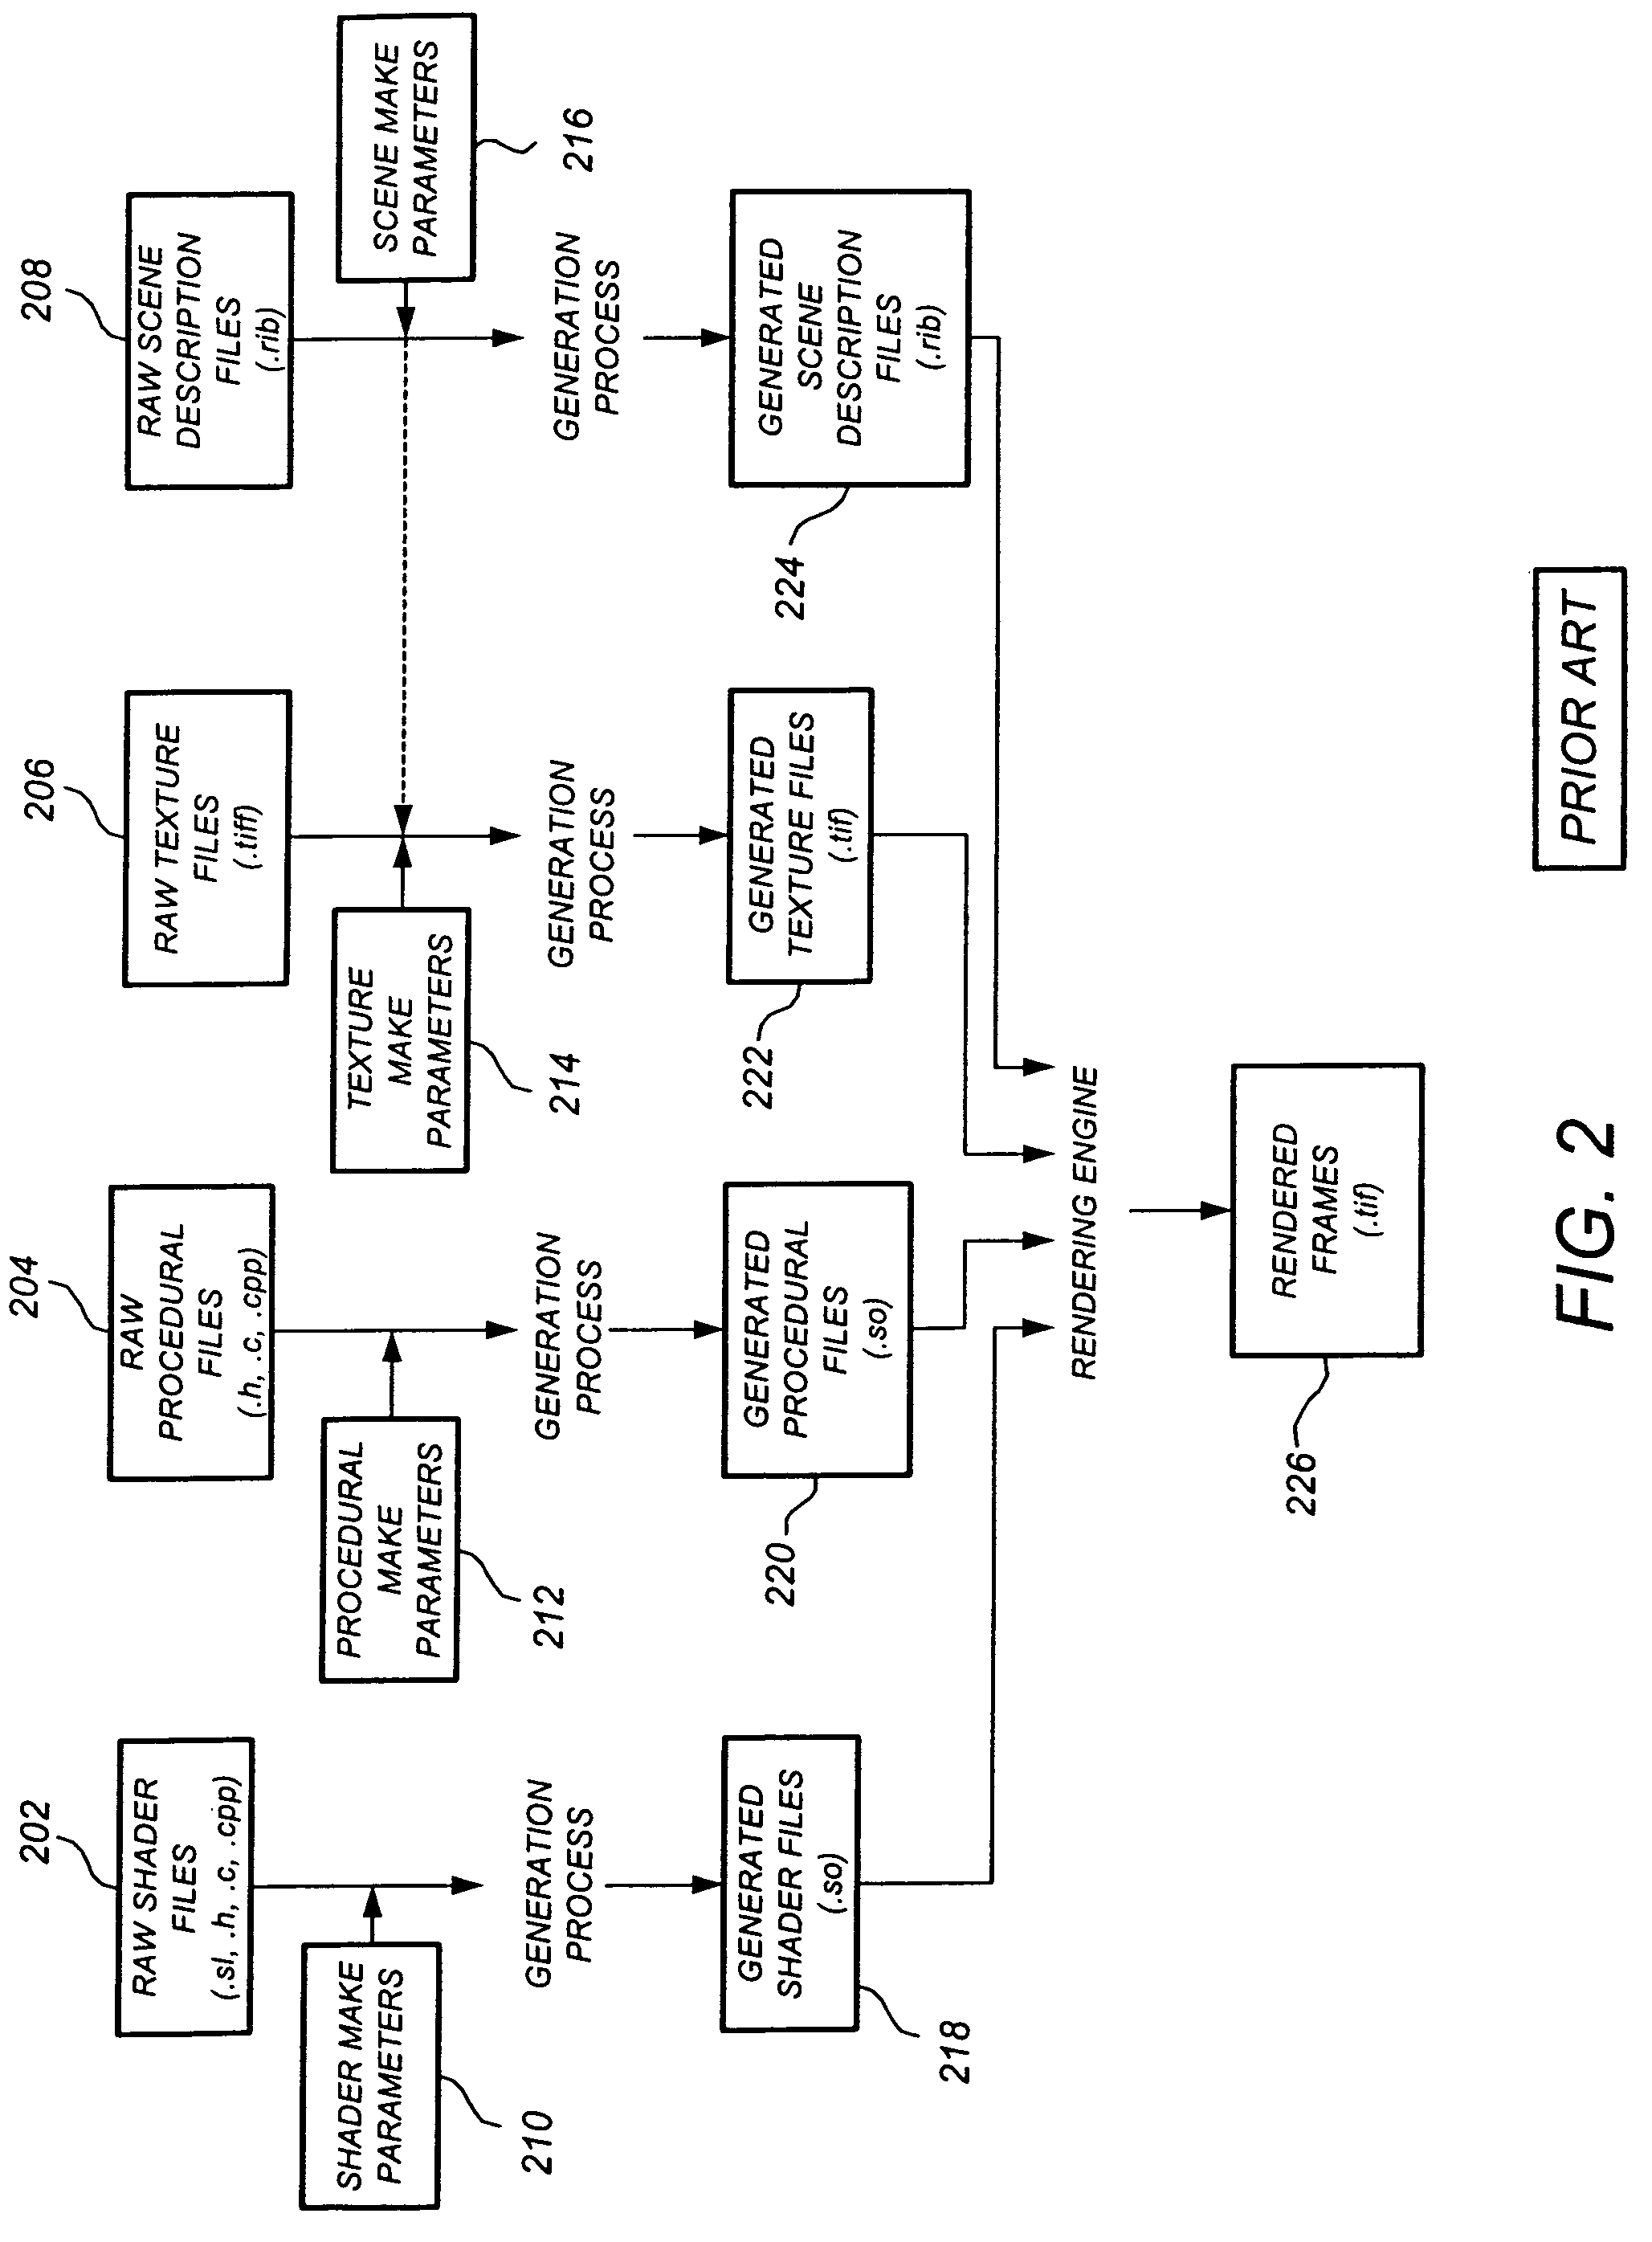 Method and system for digital rendering over a network